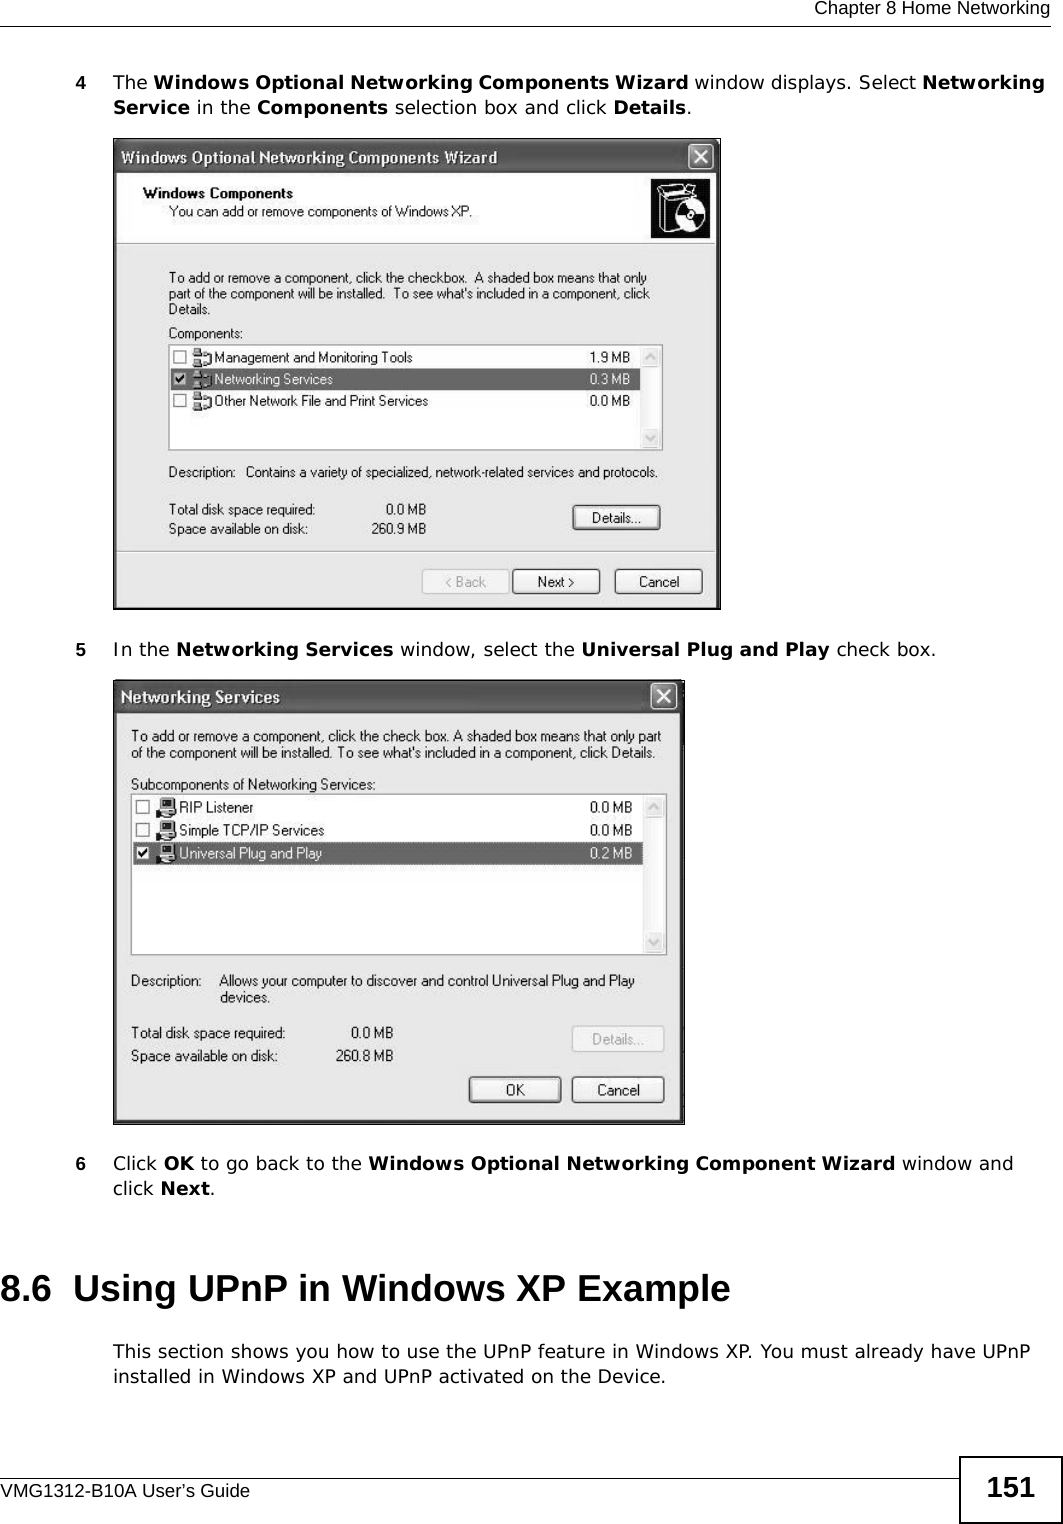  Chapter 8 Home NetworkingVMG1312-B10A User’s Guide 1514The Windows Optional Networking Components Wizard window displays. Select Networking Service in the Components selection box and click Details. Windows Optional Networking Components Wizard5In the Networking Services window, select the Universal Plug and Play check box. Networking Services6Click OK to go back to the Windows Optional Networking Component Wizard window and click Next. 8.6  Using UPnP in Windows XP ExampleThis section shows you how to use the UPnP feature in Windows XP. You must already have UPnP installed in Windows XP and UPnP activated on the Device.